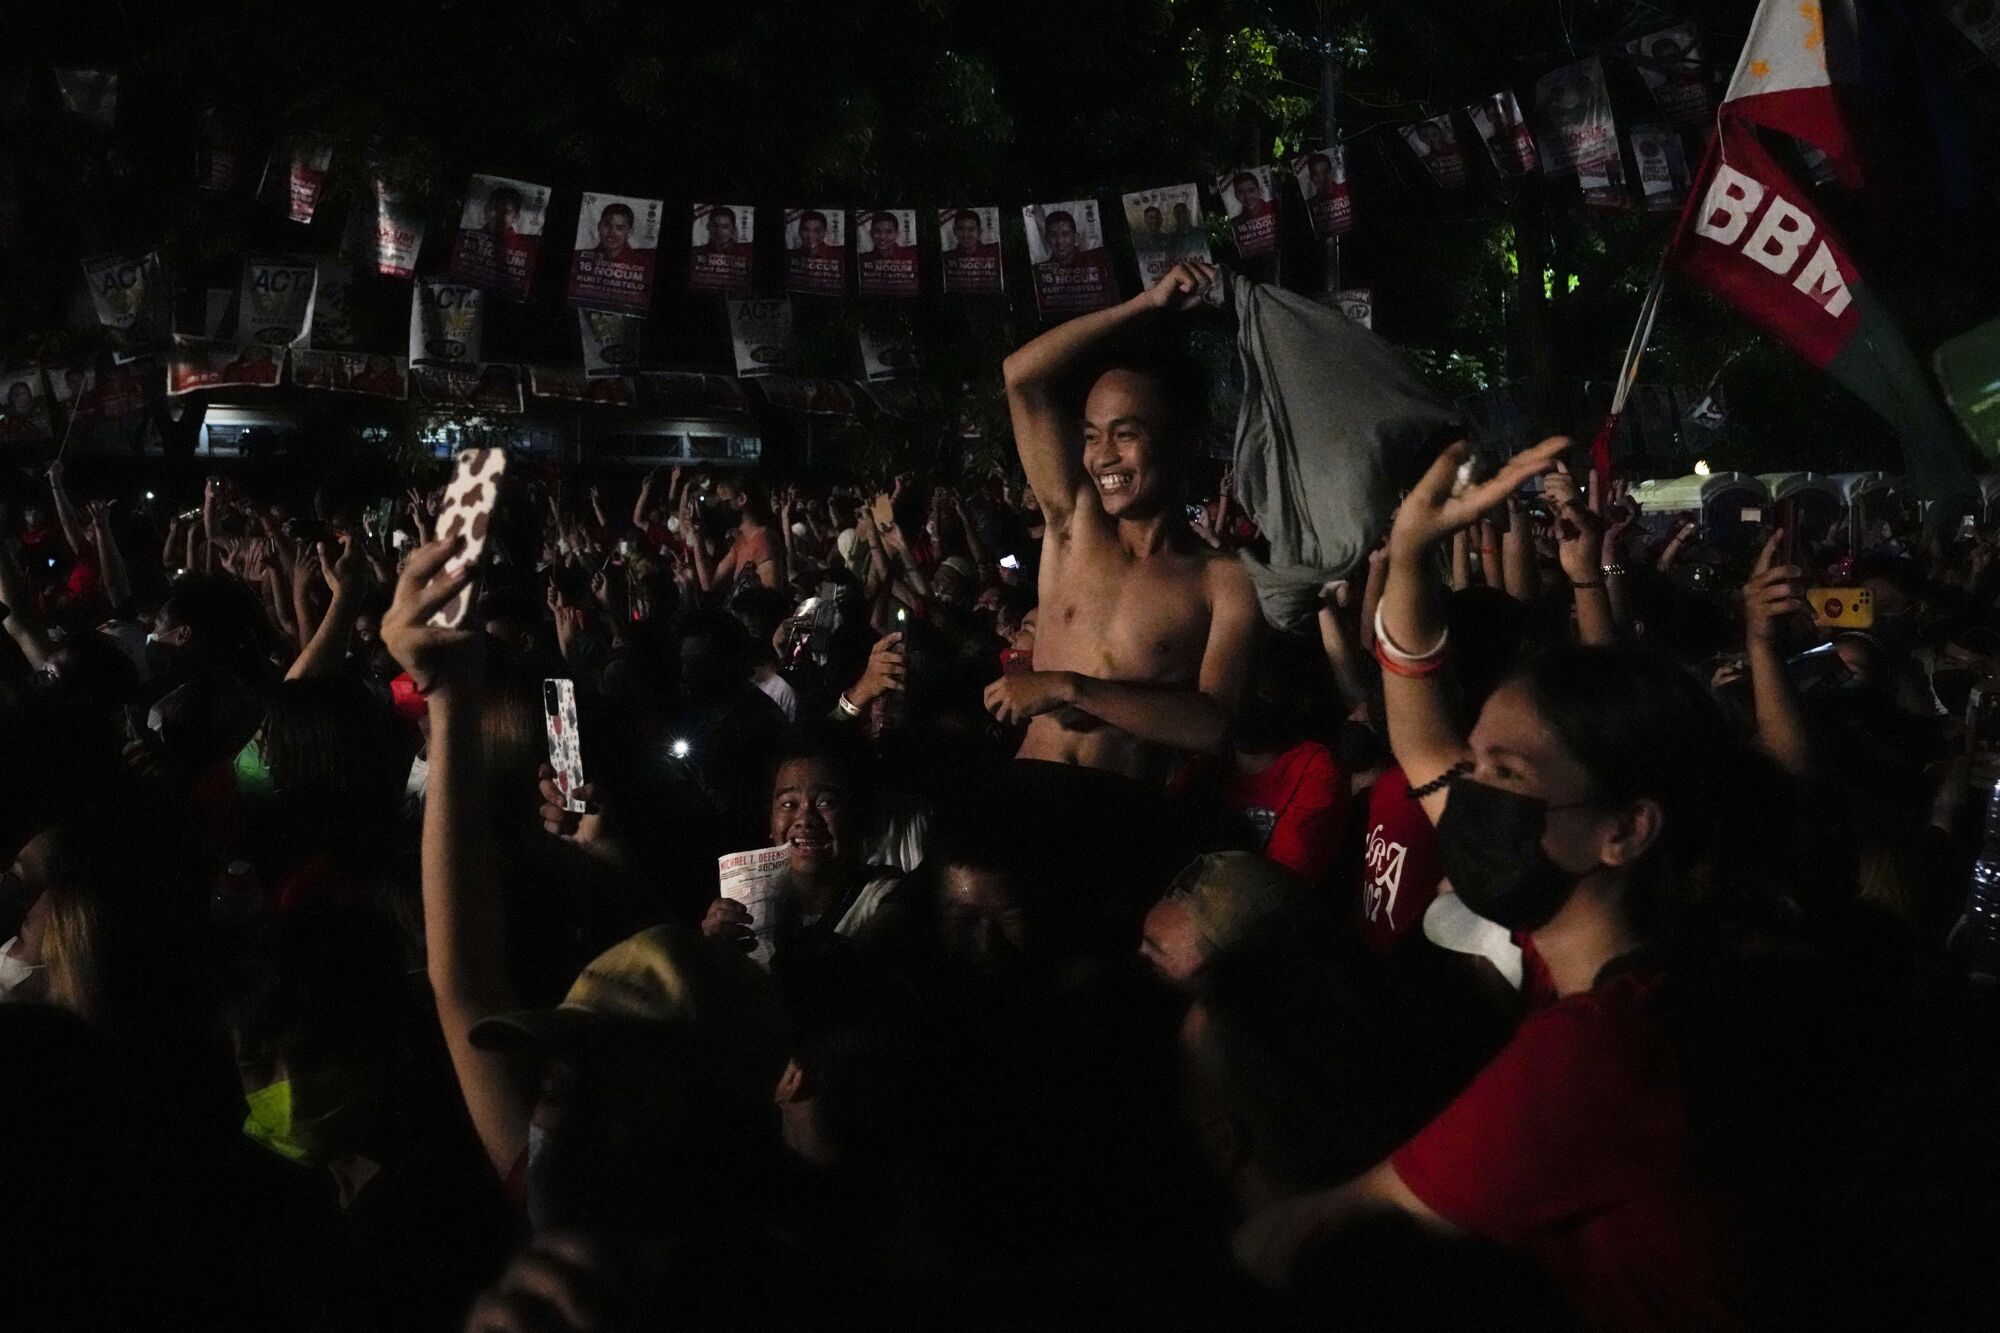 A shirtless man smiles, raising one arm, as he is surrounded by other people with campaign posters overhead behind him